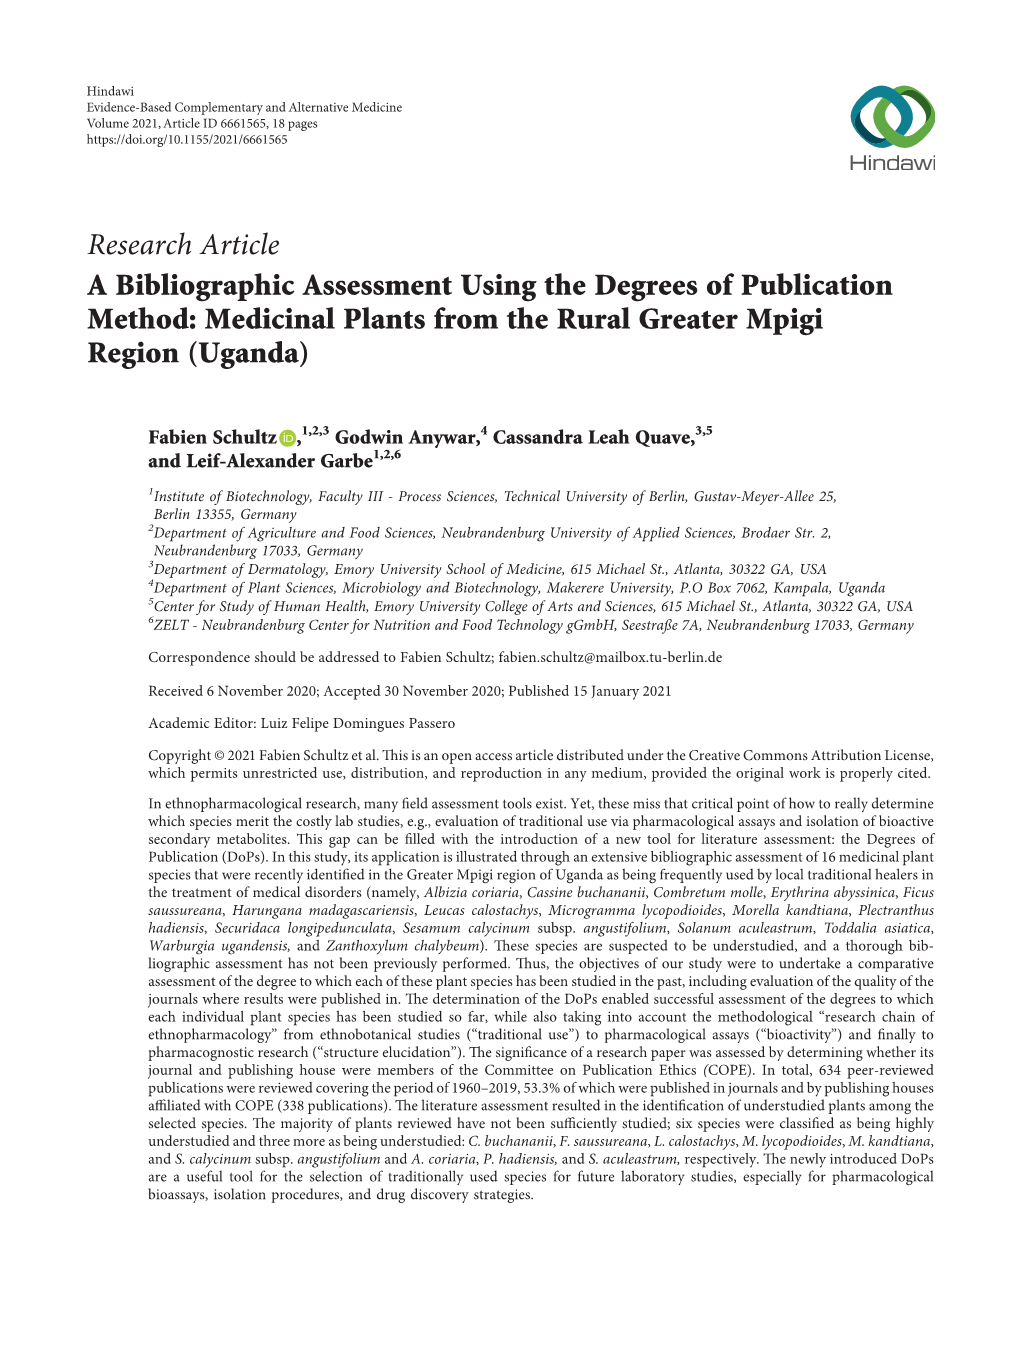 A Bibliographic Assessment Using the Degrees of Publication Method: Medicinal Plants from the Rural Greater Mpigi Region (Uganda)